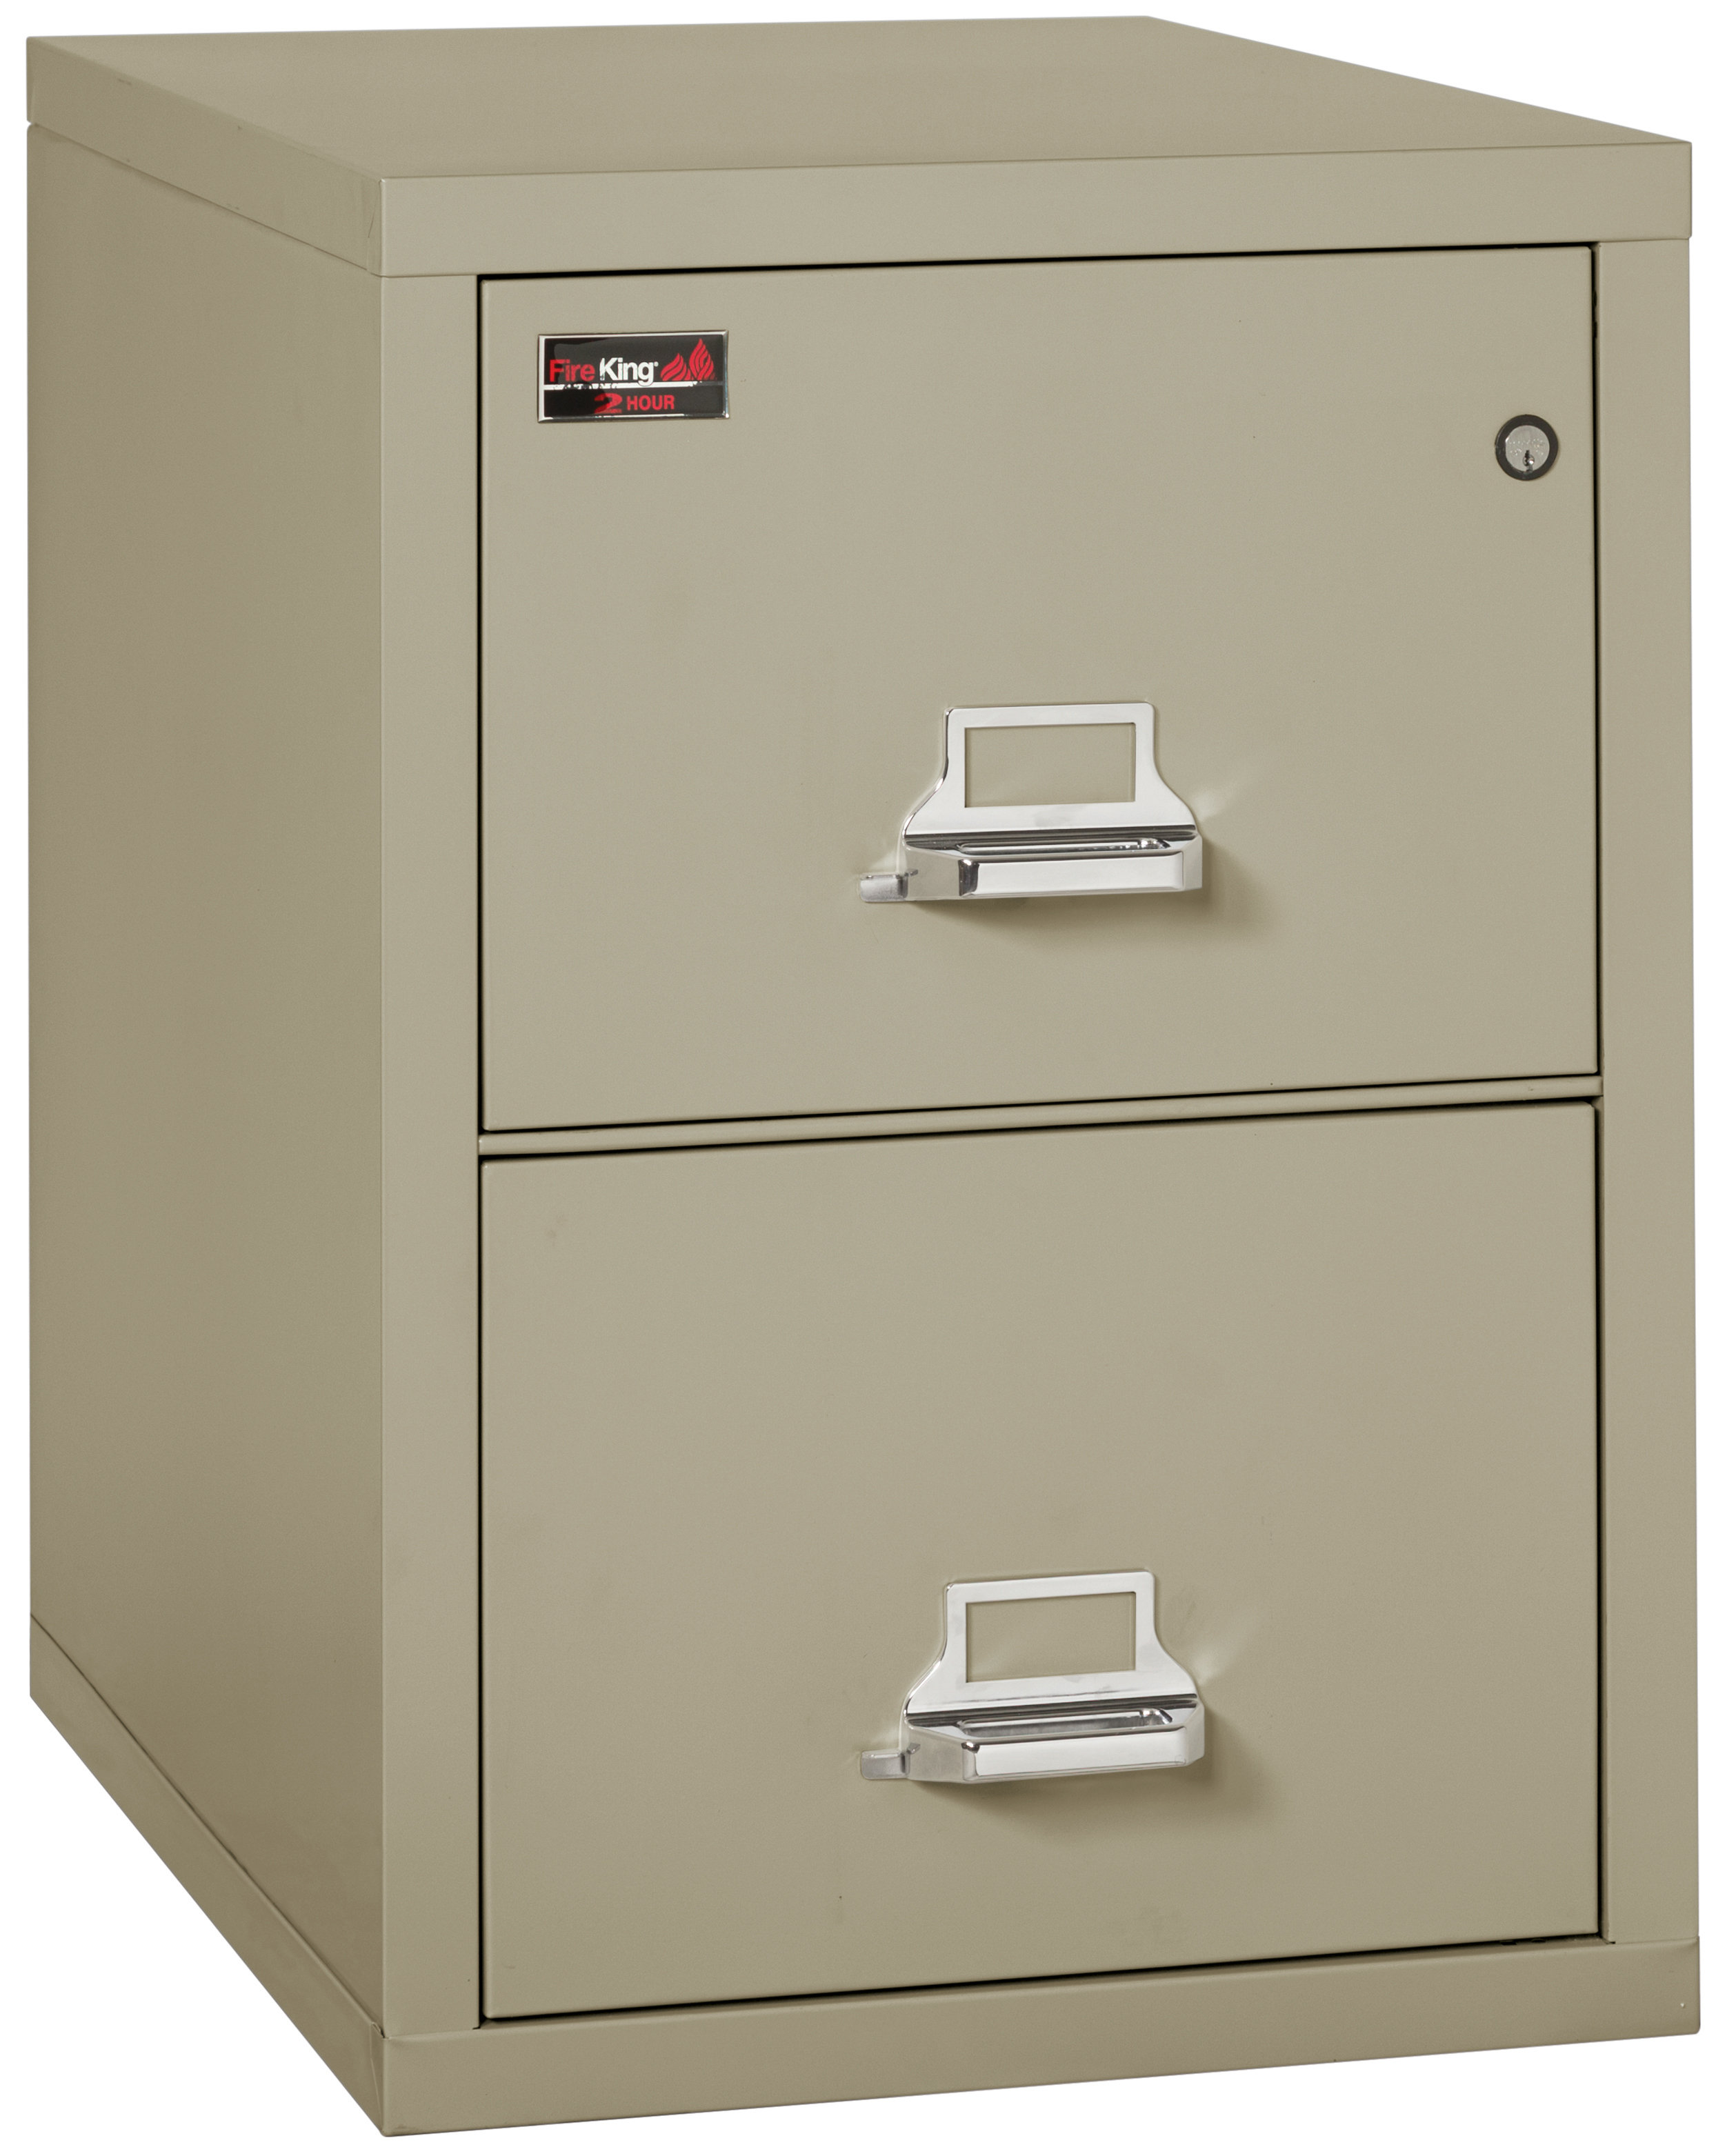 Parchment Lock Key Lock Fireproof 4-Drawer Vertical File Finish 